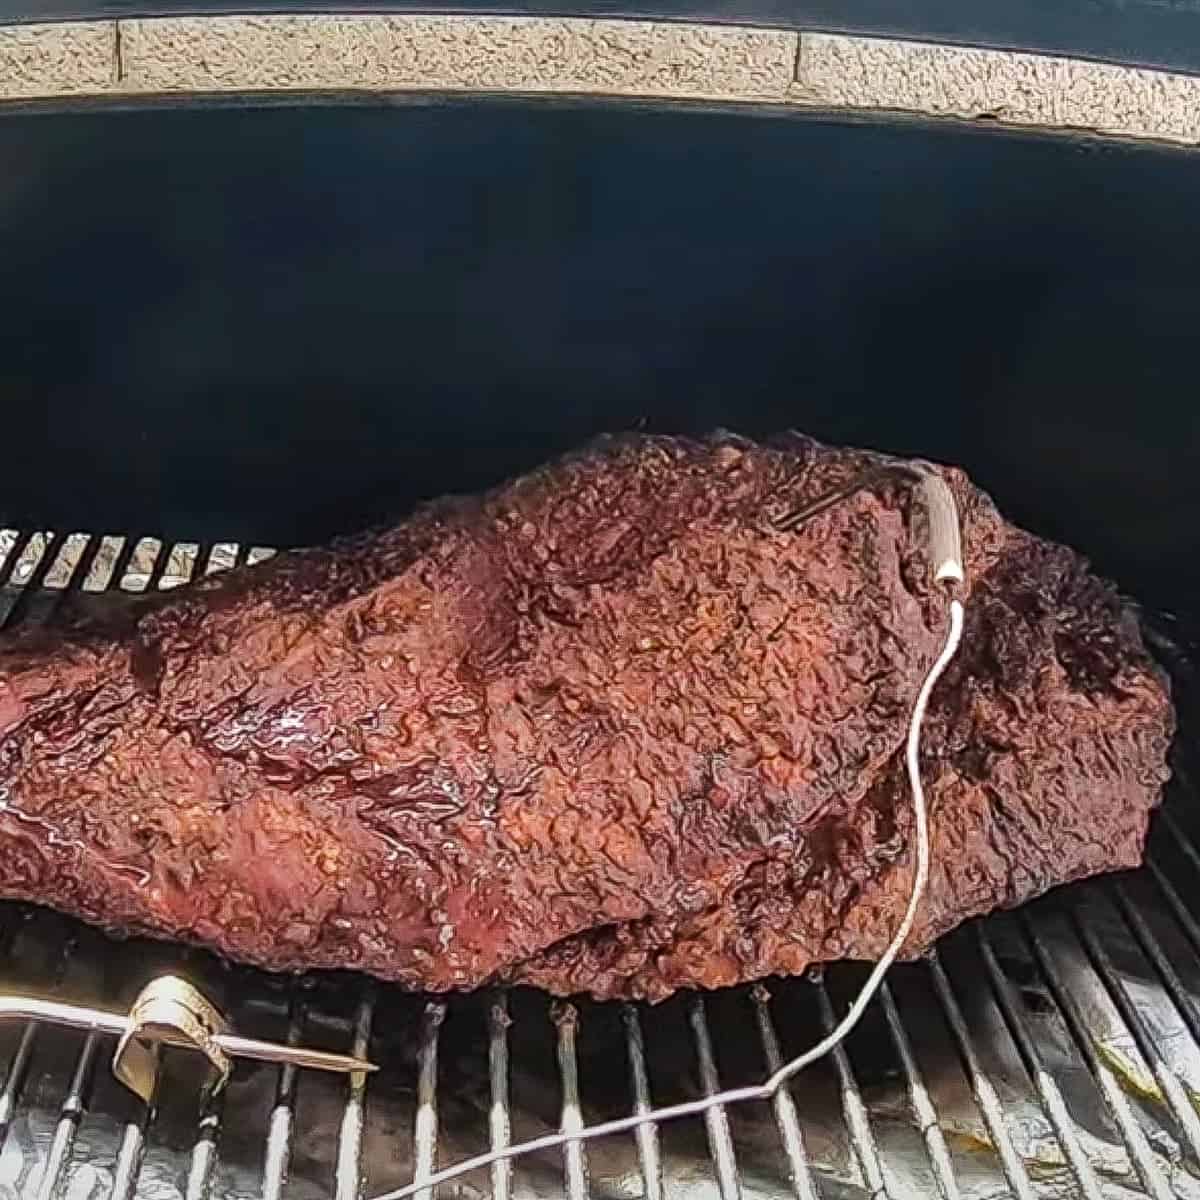 Hot and Fast Brisket on a Pellet Grill